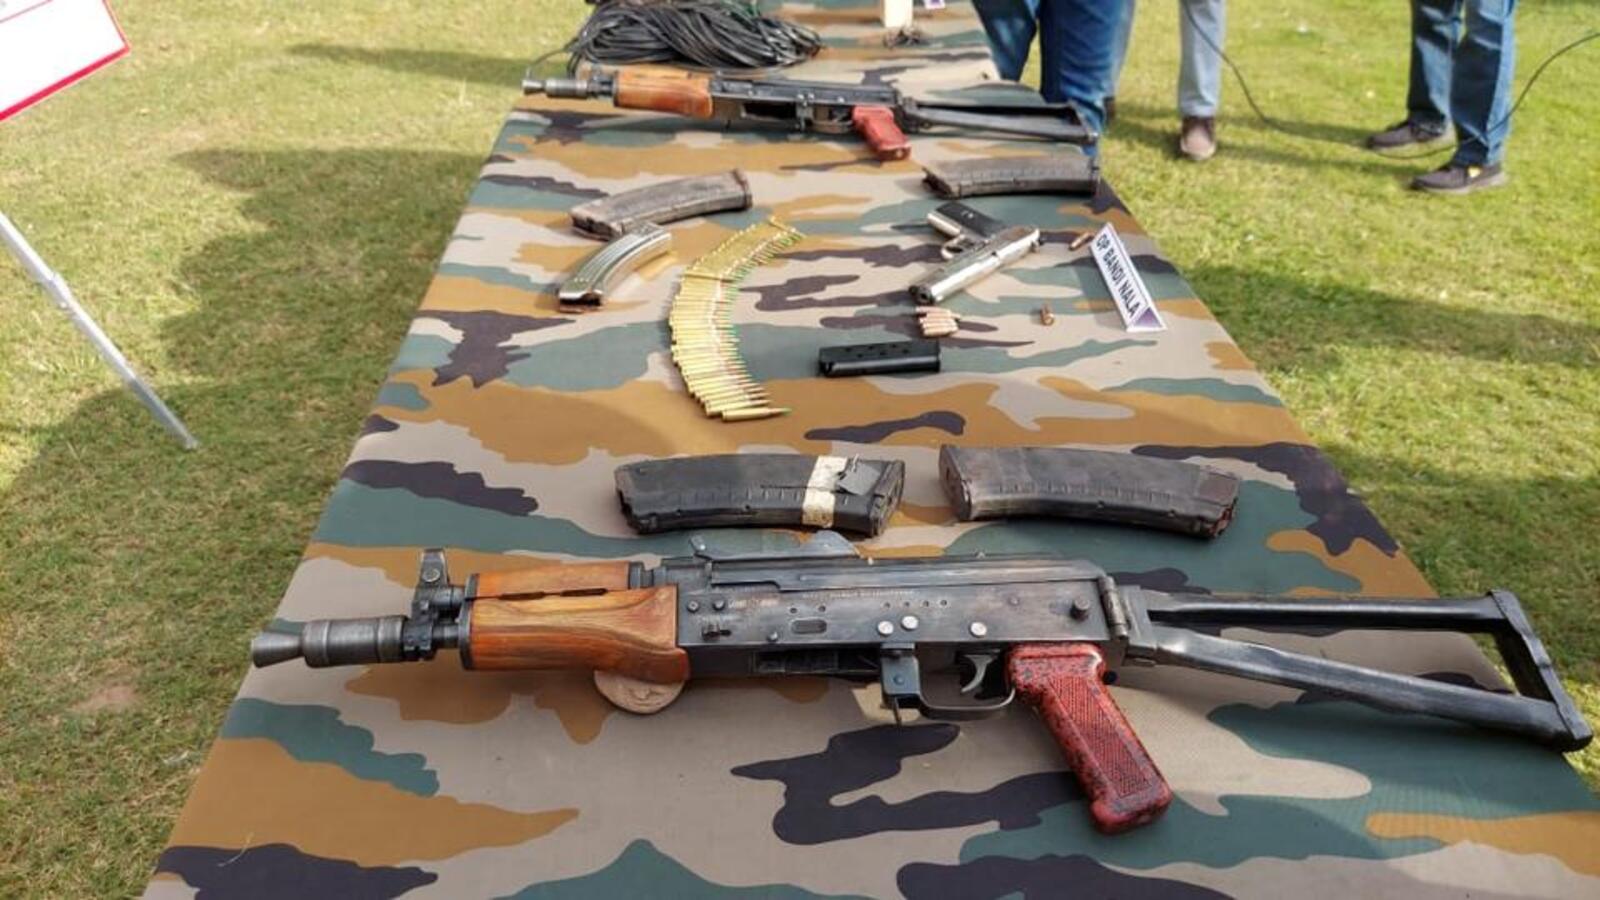 mines-arms-ammunition-and-amp-drugs-at-loc-expose-pakistan-s-sinister-designs-army